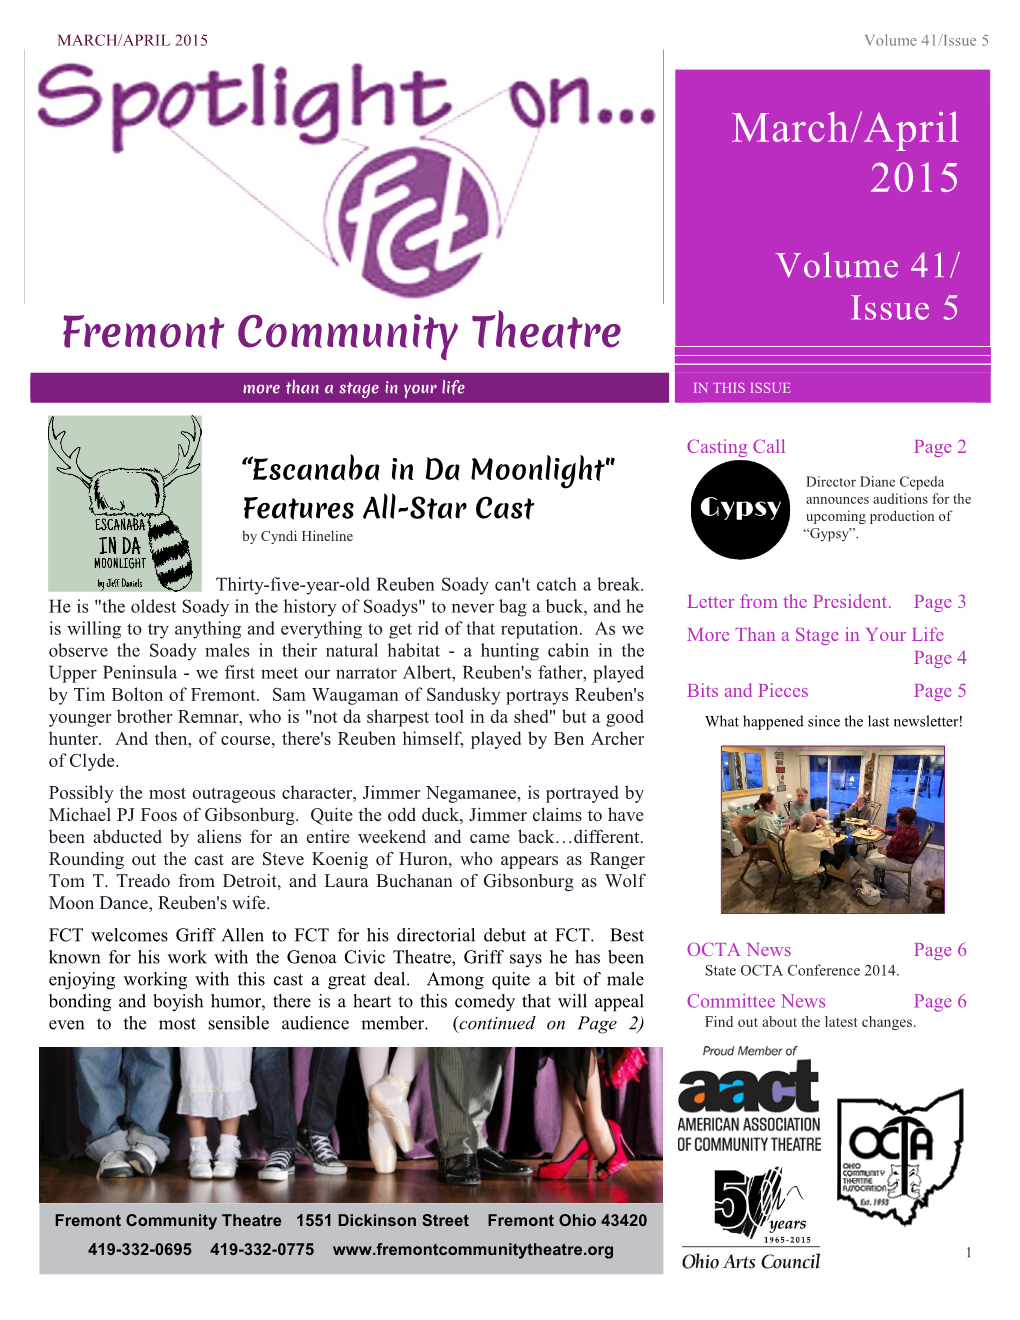 MARCH/APRIL 2015 Volume 41/Issue 5